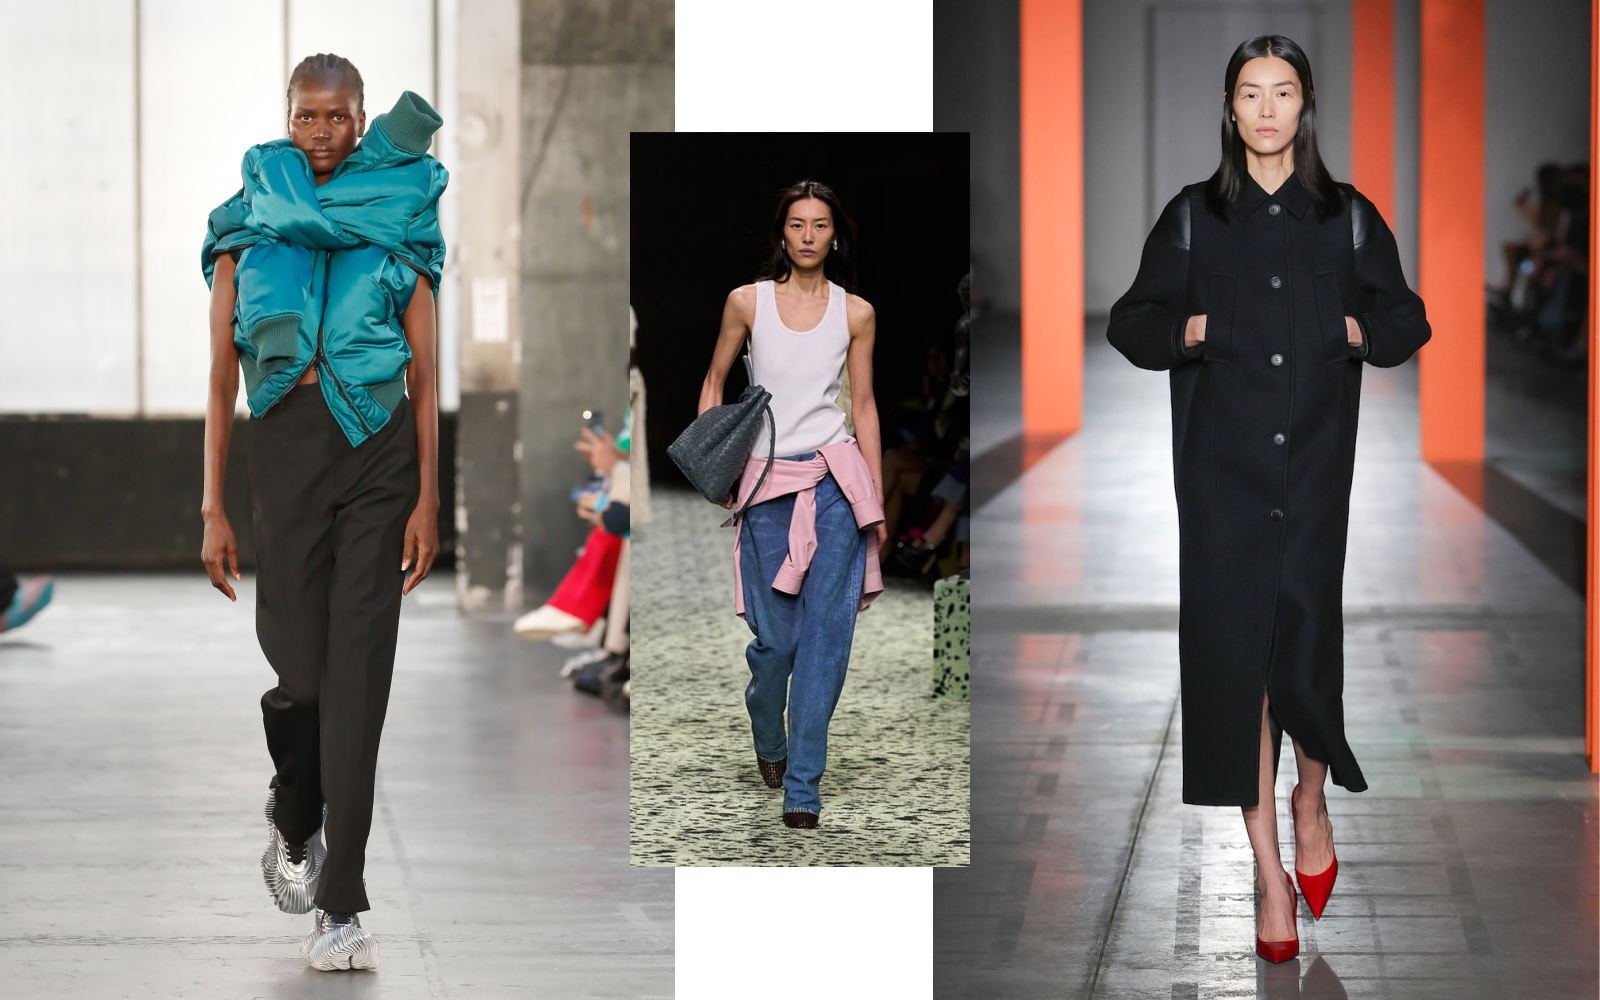 Pops of colour against more neutral outfits on the AW23/24 runways at Bottega Veneta, Botter and Prada